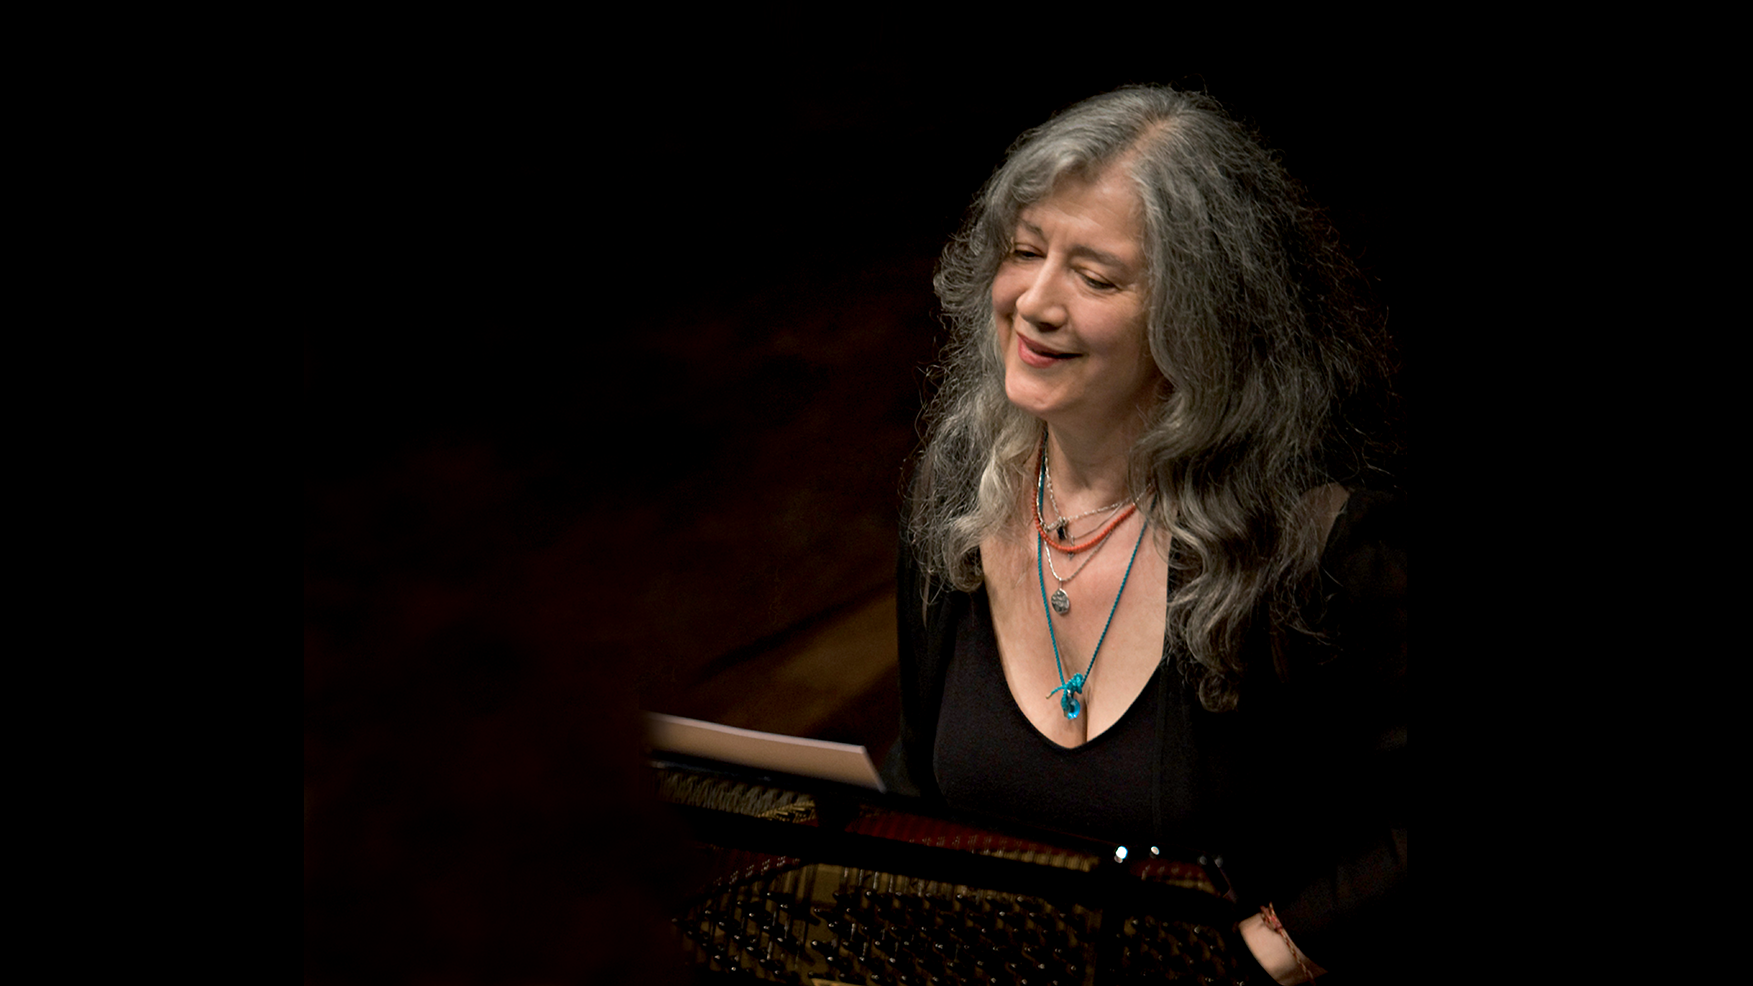 Martha Argerich Octaves : Pianist Martha Argerich Has 3 Daughters With ...